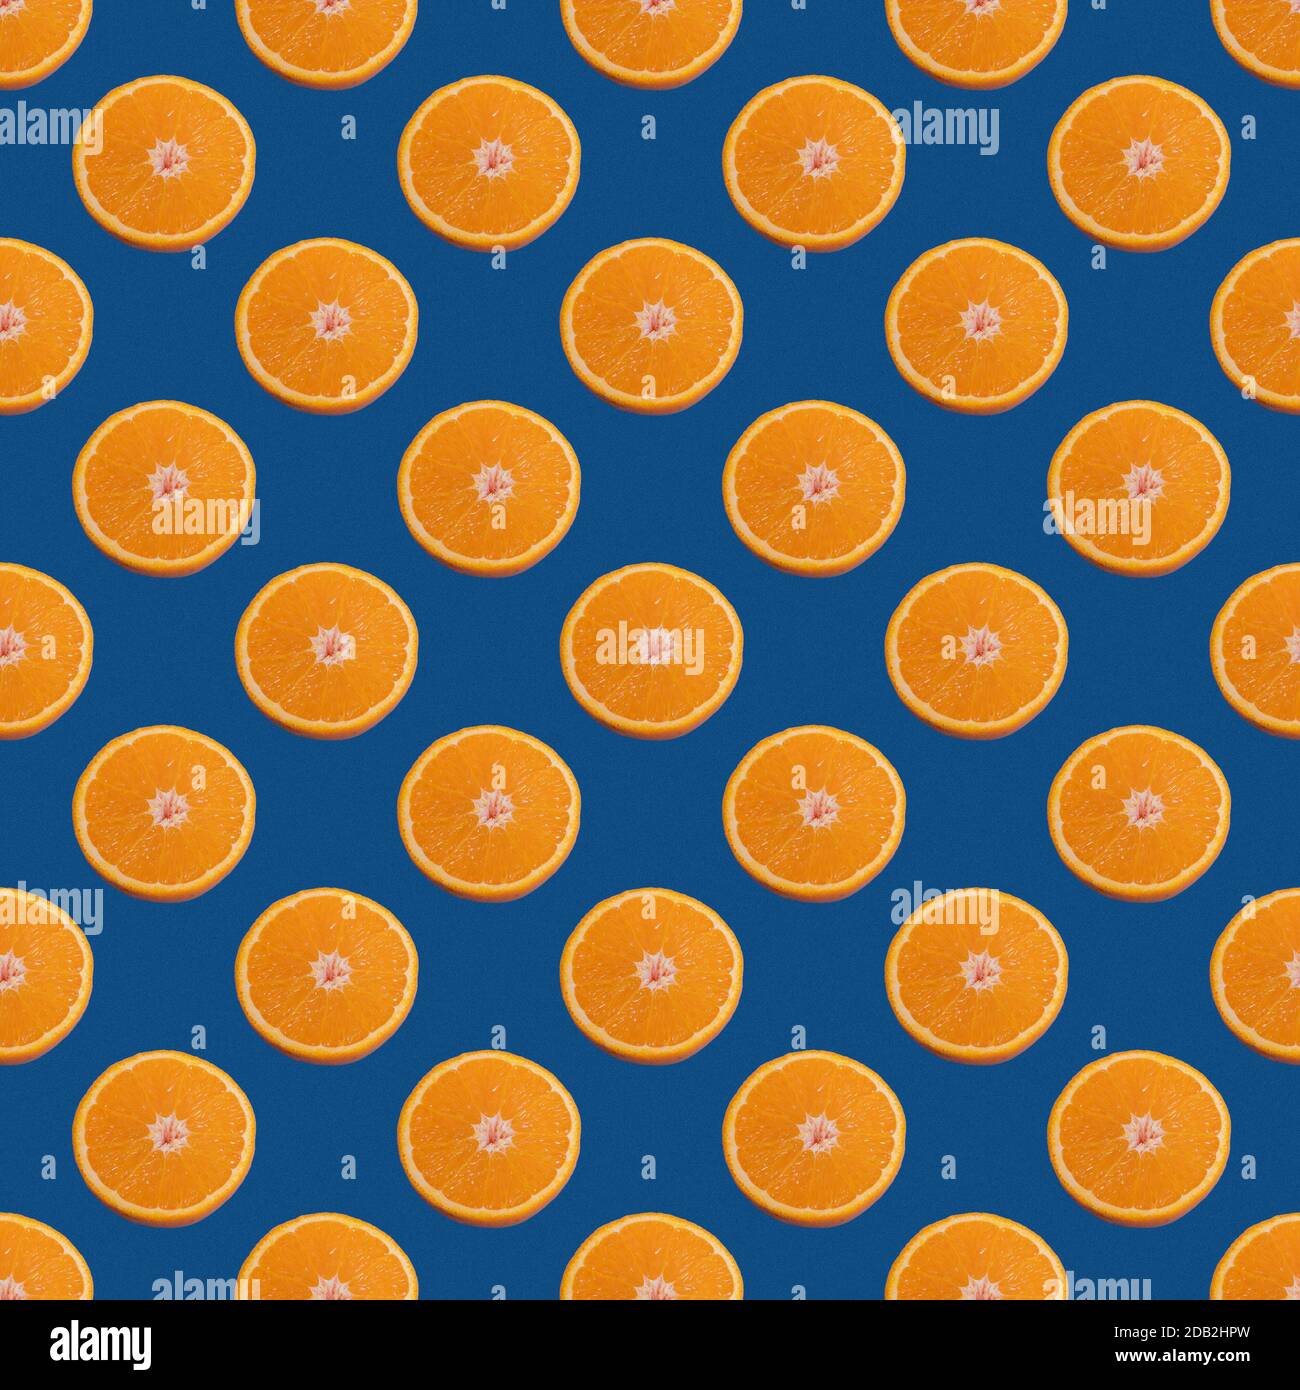 https://c8.alamy.com/comp/2DB2HPW/seamless-pattern-of-half-orange-isolated-on-a-classic-blue-background-minimal-food-texture-fruit-background-2DB2HPW.jpg